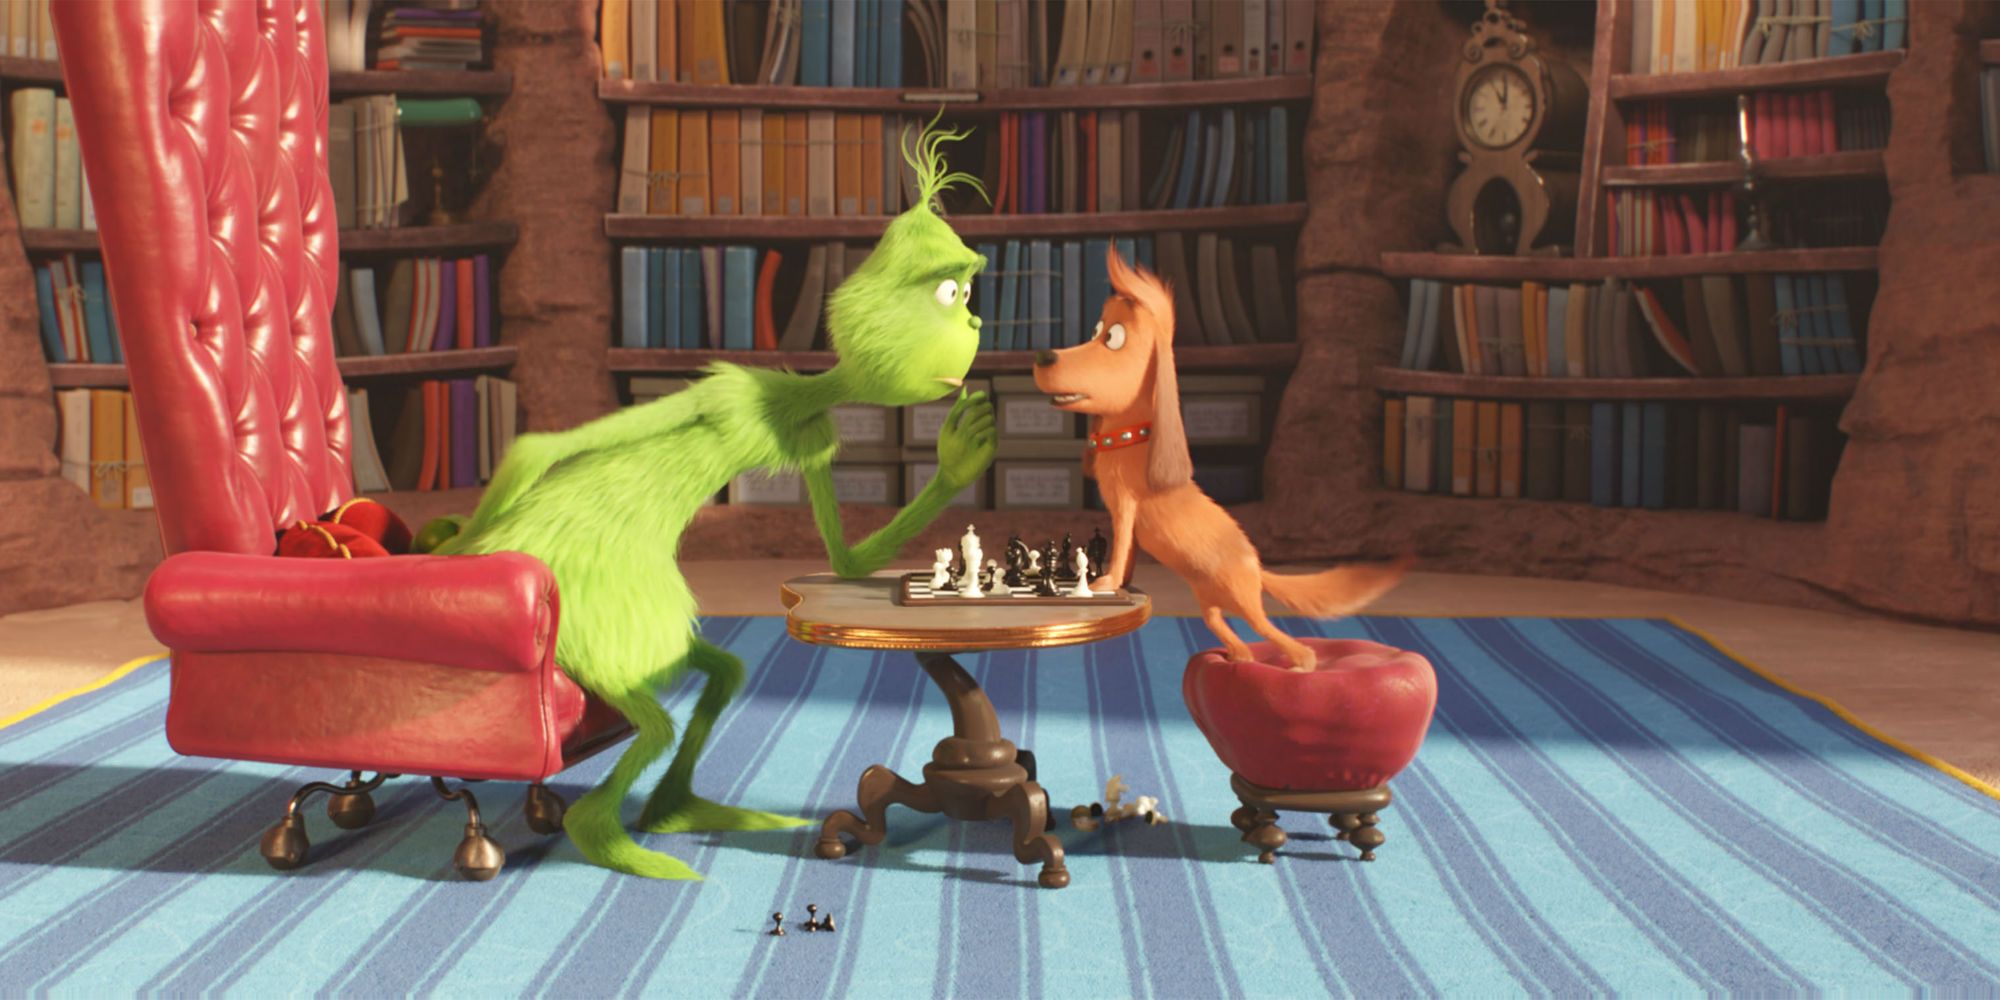 Max and the Grinch square up to each other over a game of chess in the 2018 animated movie